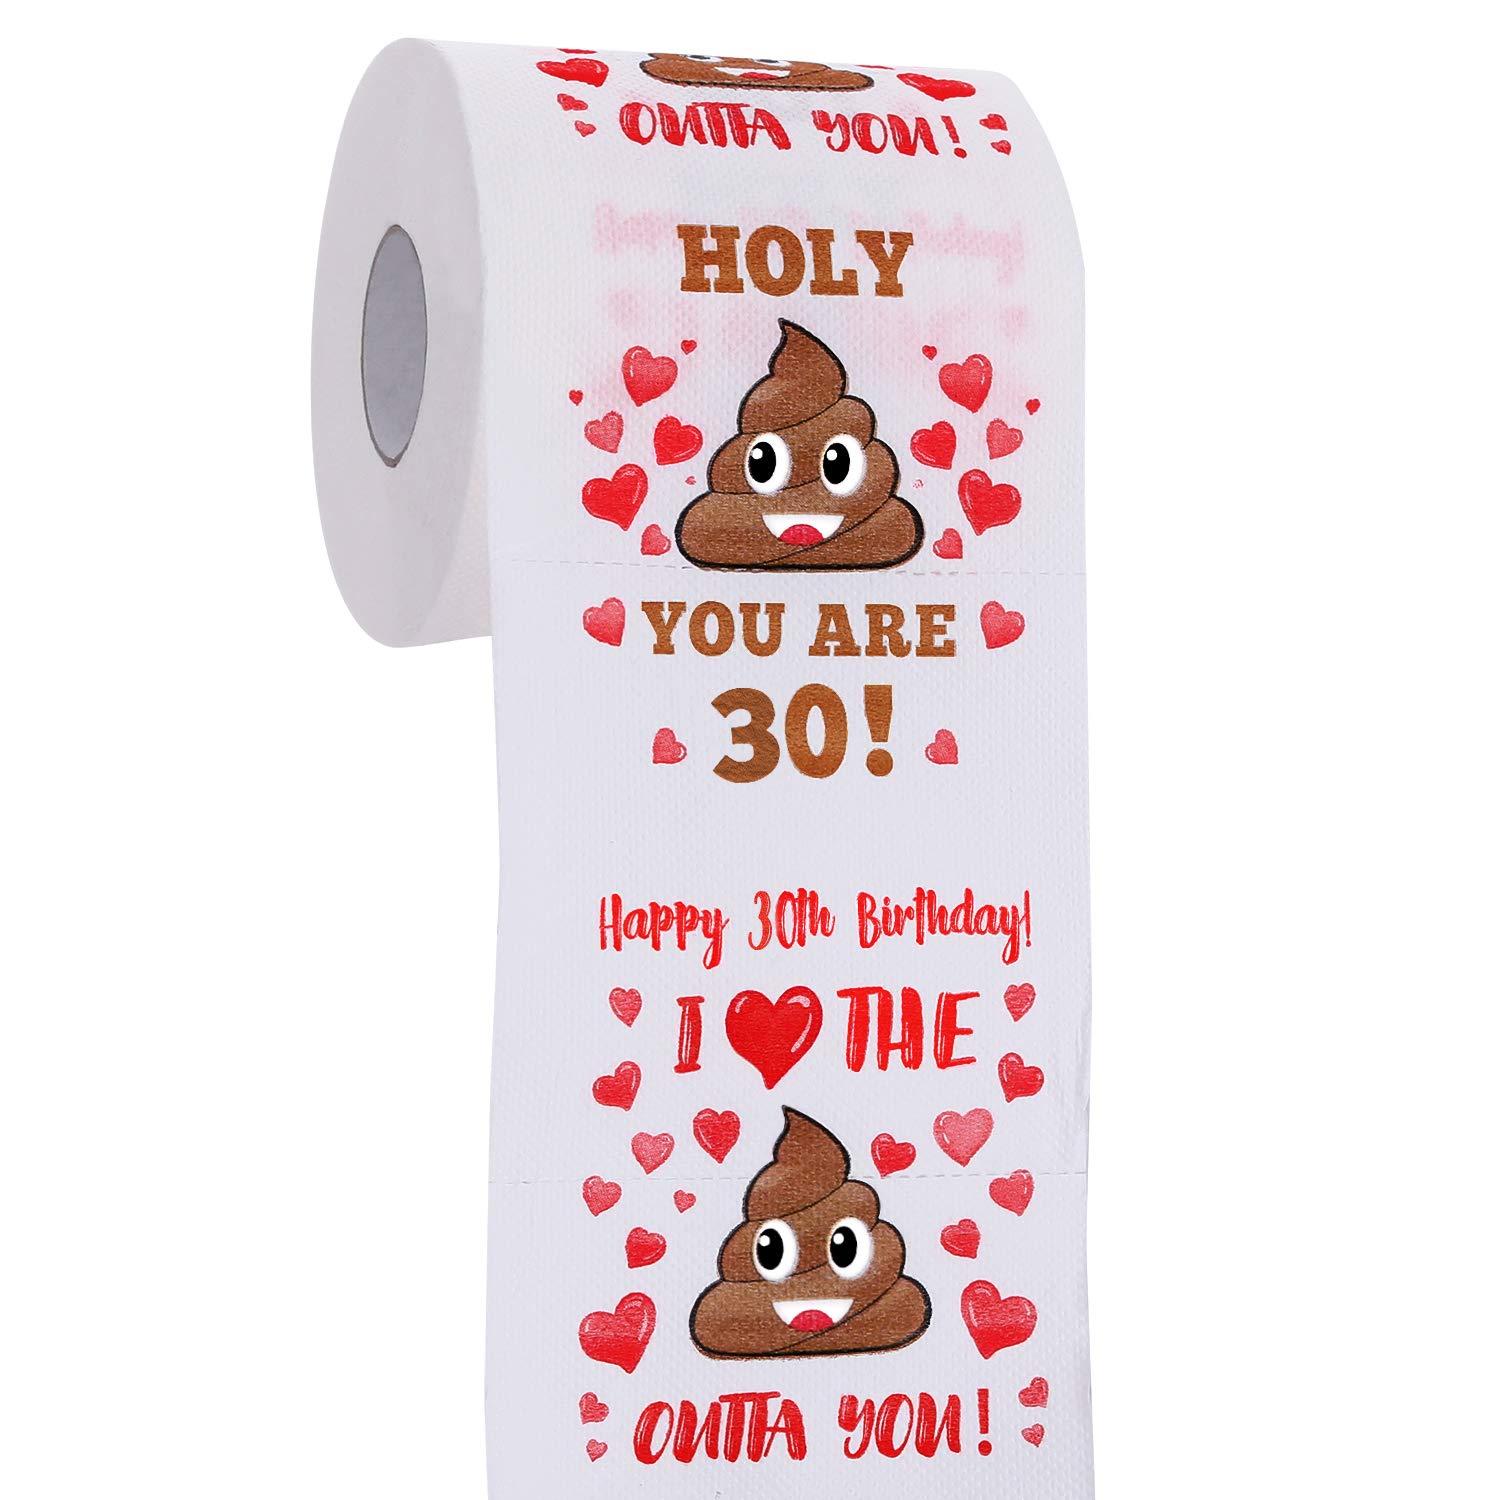 30th Birthday Gifts for Men and Women - Happy Prank Toilet Paper - 30th Birthday Decorations for Him, Her - Party Supplies Favors Ideas - Funny Gag Gifts, Novelty Bday Present for Friends, Family